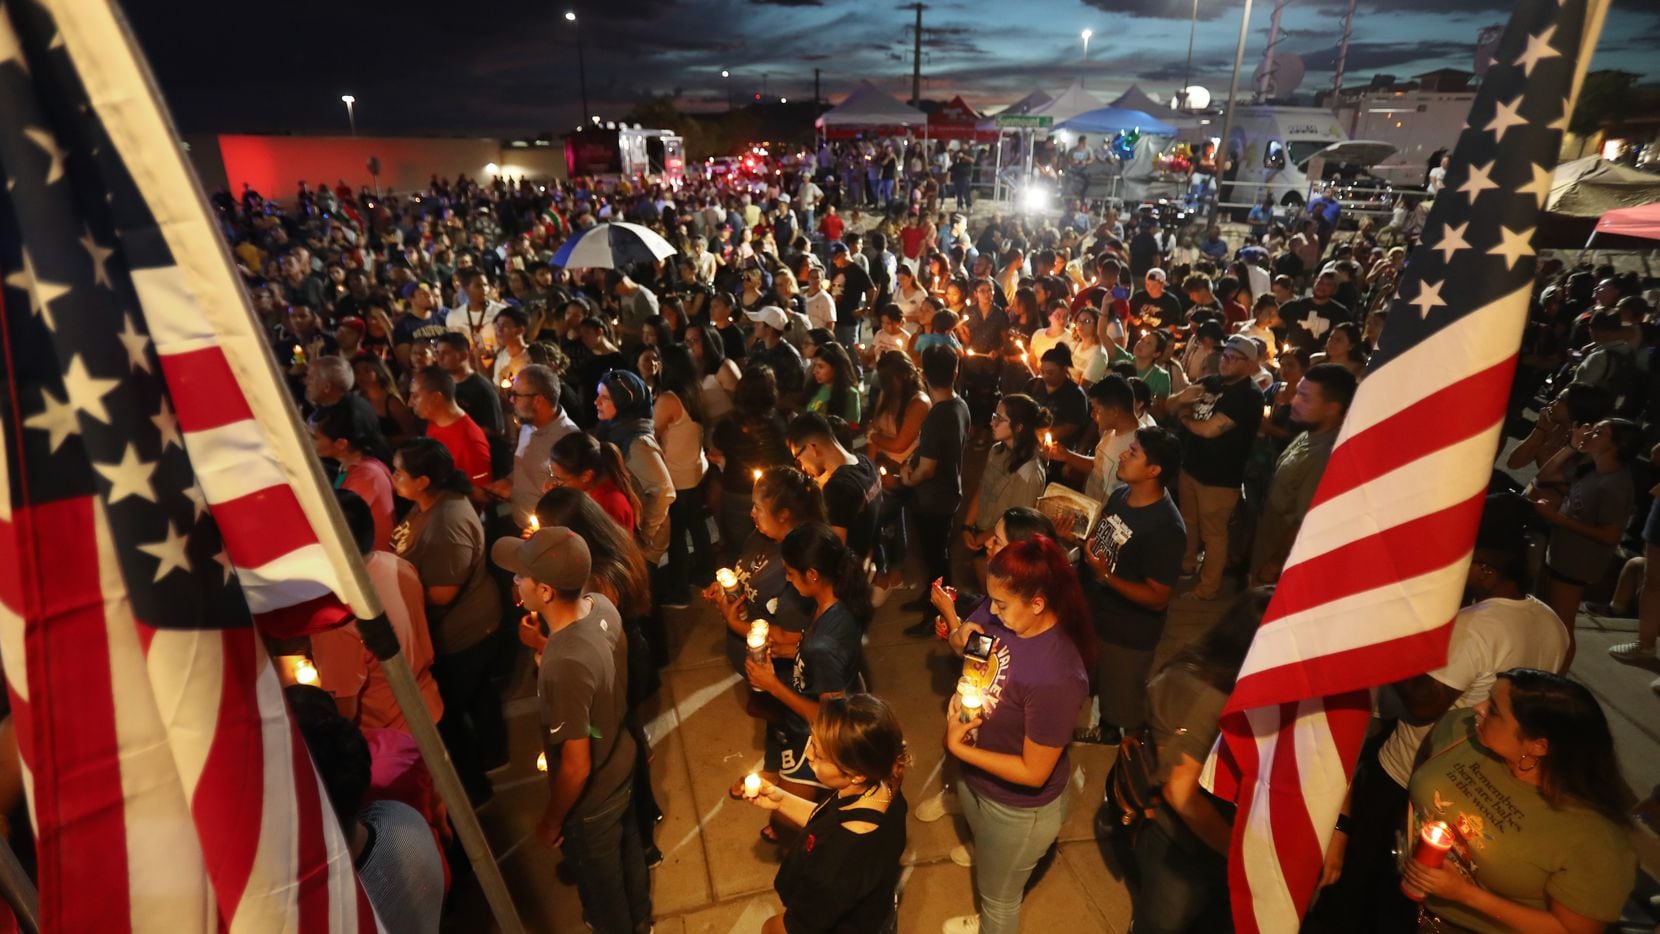 EL PASO, TEXAS - AUGUST 07: People attend a candlelight vigil at a makeshift memorial honoring victims of a mass shooting which left at least 22 people dead, on August 7, 2019 in El Paso, Texas. President Donald Trump visited the city earlier today. A 21-year-old white male suspect remains in custody in El Paso which sits along the U.S.-Mexico border.   (Photo by Mario Tama/Getty Images) ***BESTPIX***